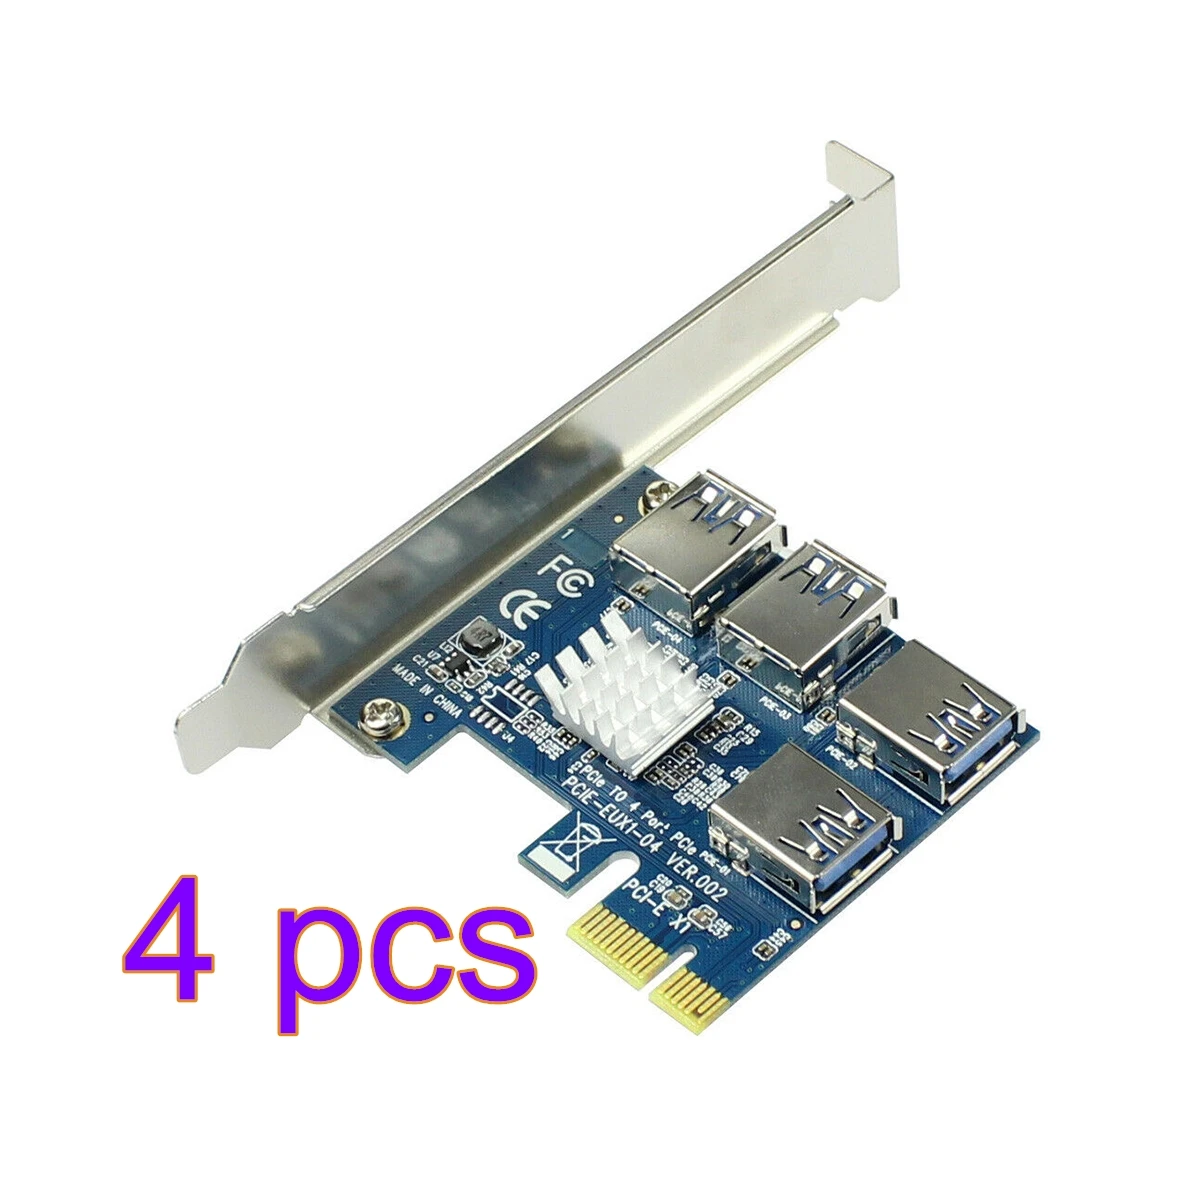 4 Pieces PCIE PCI-E PCI Express Riser Card 1x to 16x 1 to 4 USB 3.0 Slot Multiplier Hub Adapter For Devices